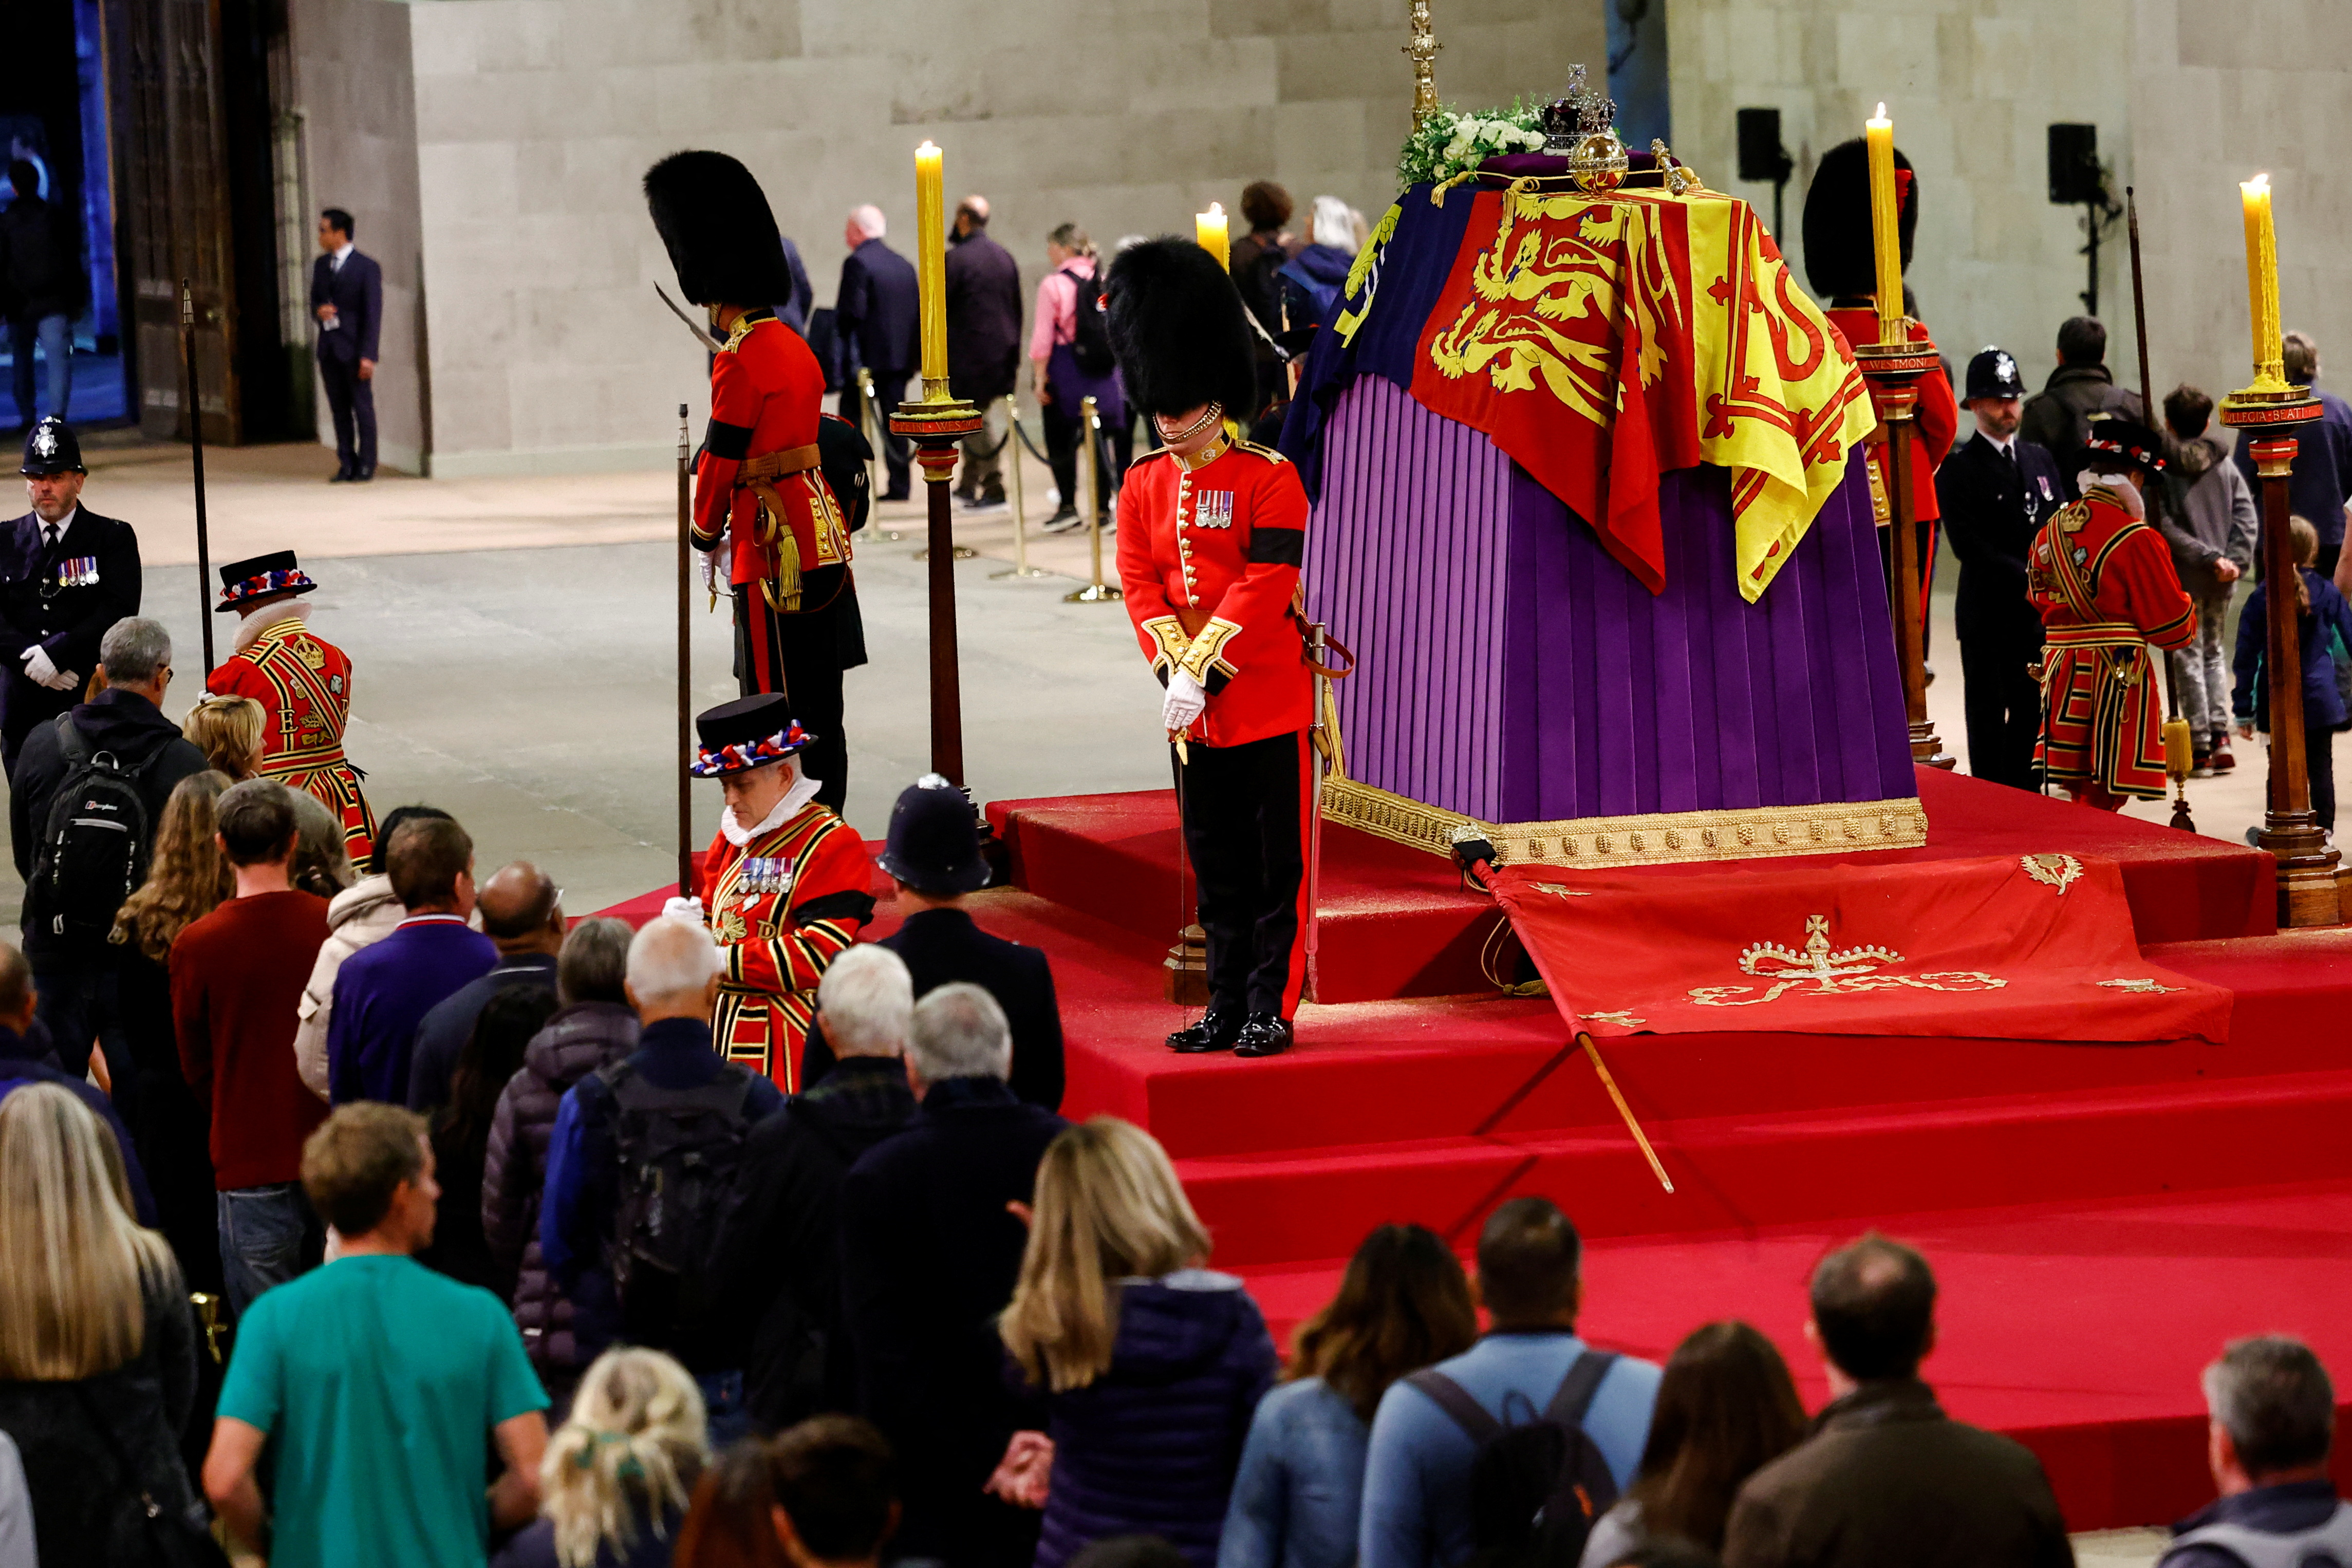 A minute of silence was given for the death of Queen Elizabeth II in the palace (REUTERS / Sarah Meyssonnier / Pool)